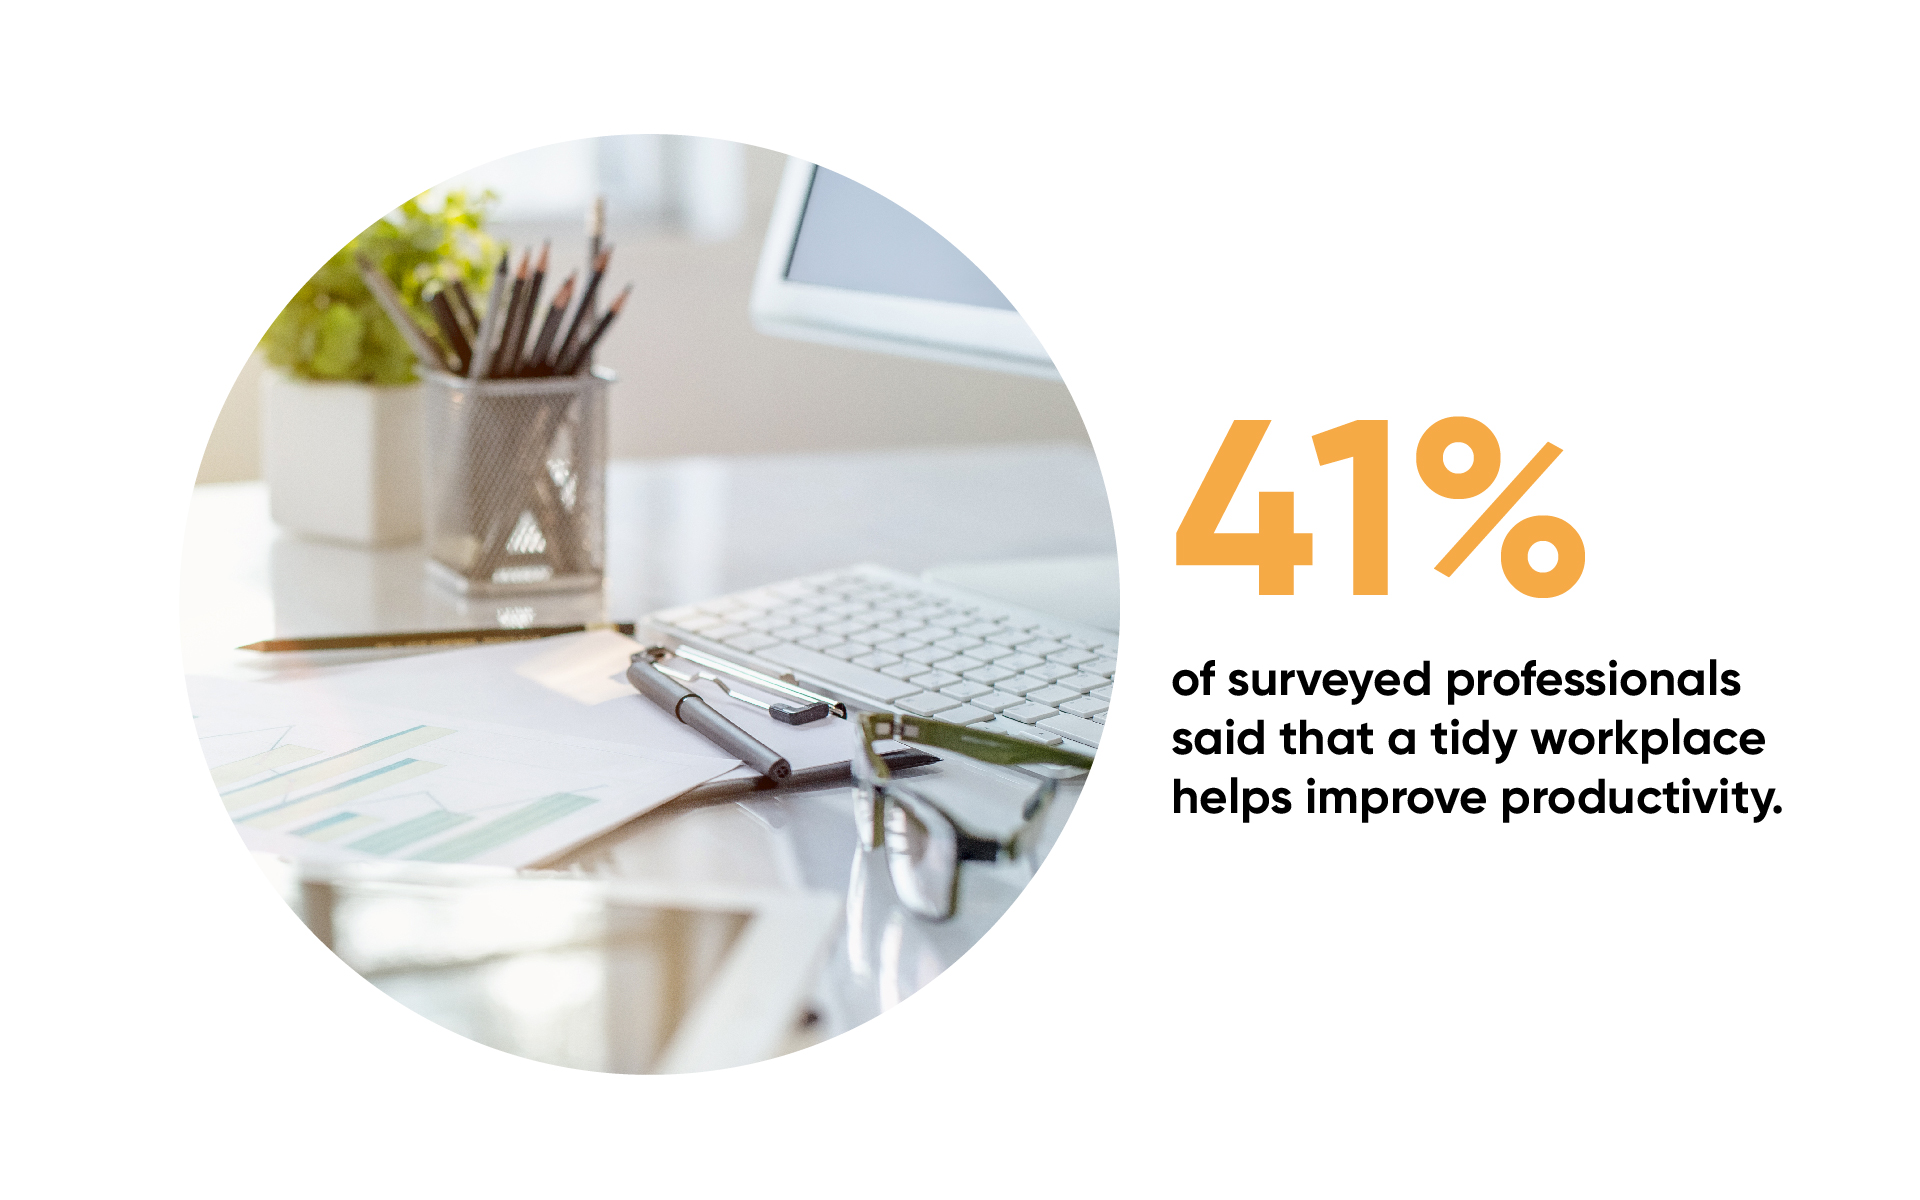 41% of surveyed professionals said that a tidy workplace helps improve productivity